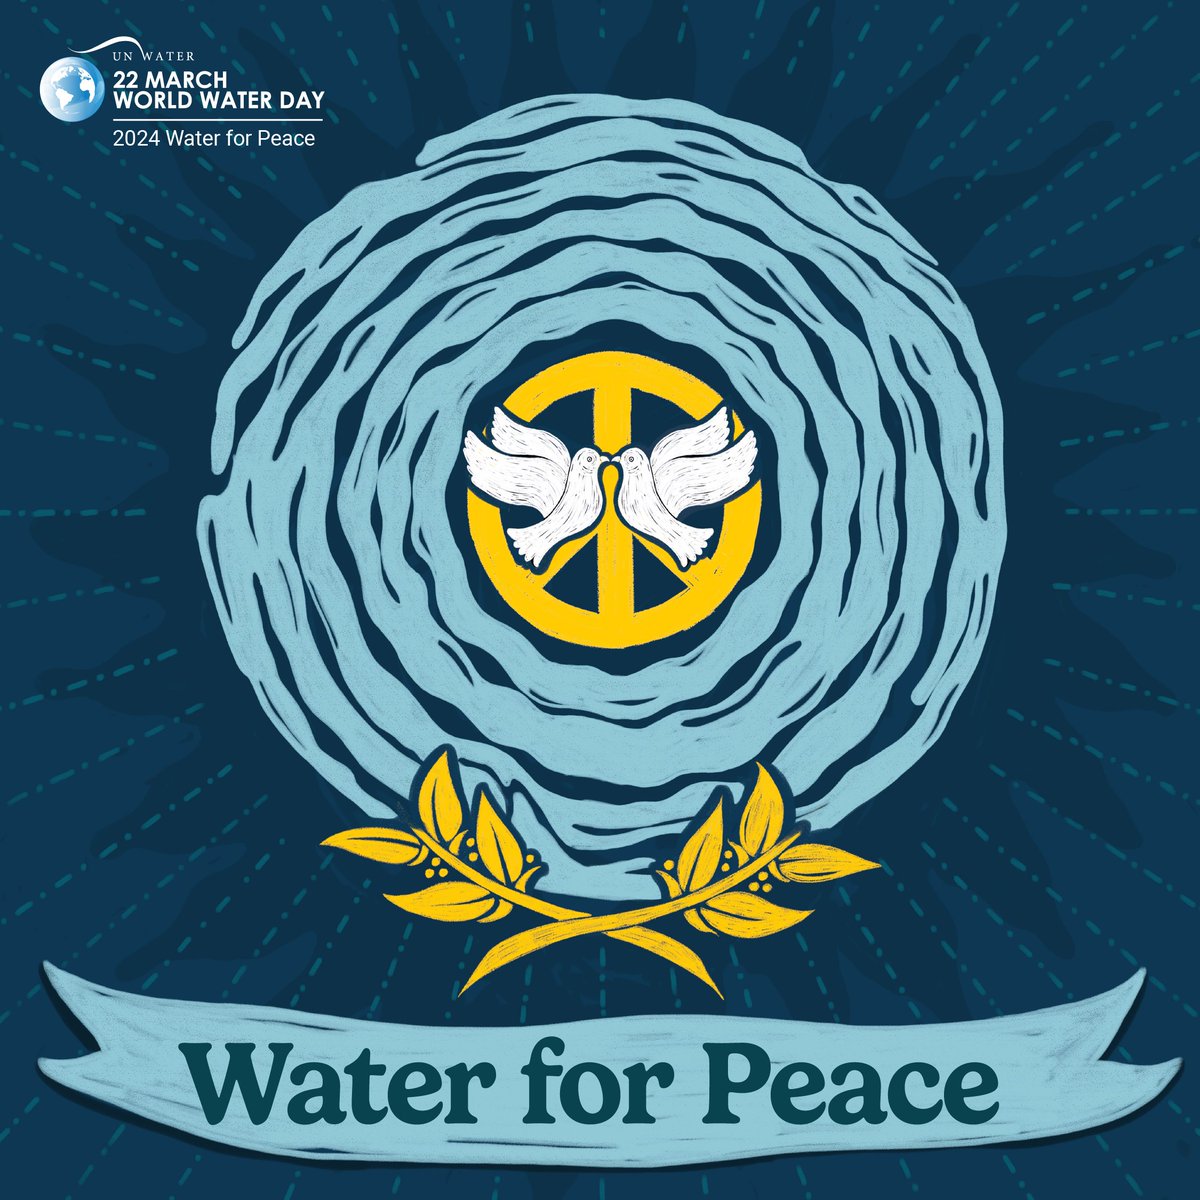 Today is #worldwaterday & this year's theme is 'Water for peace'. #Eawag #Sandec honours the efforts of the @UN to observe this day & make safe #water accessible to all. Water for all is a central pillar of Sandec's work. Learn more at: sandec.ch @EawagResearch